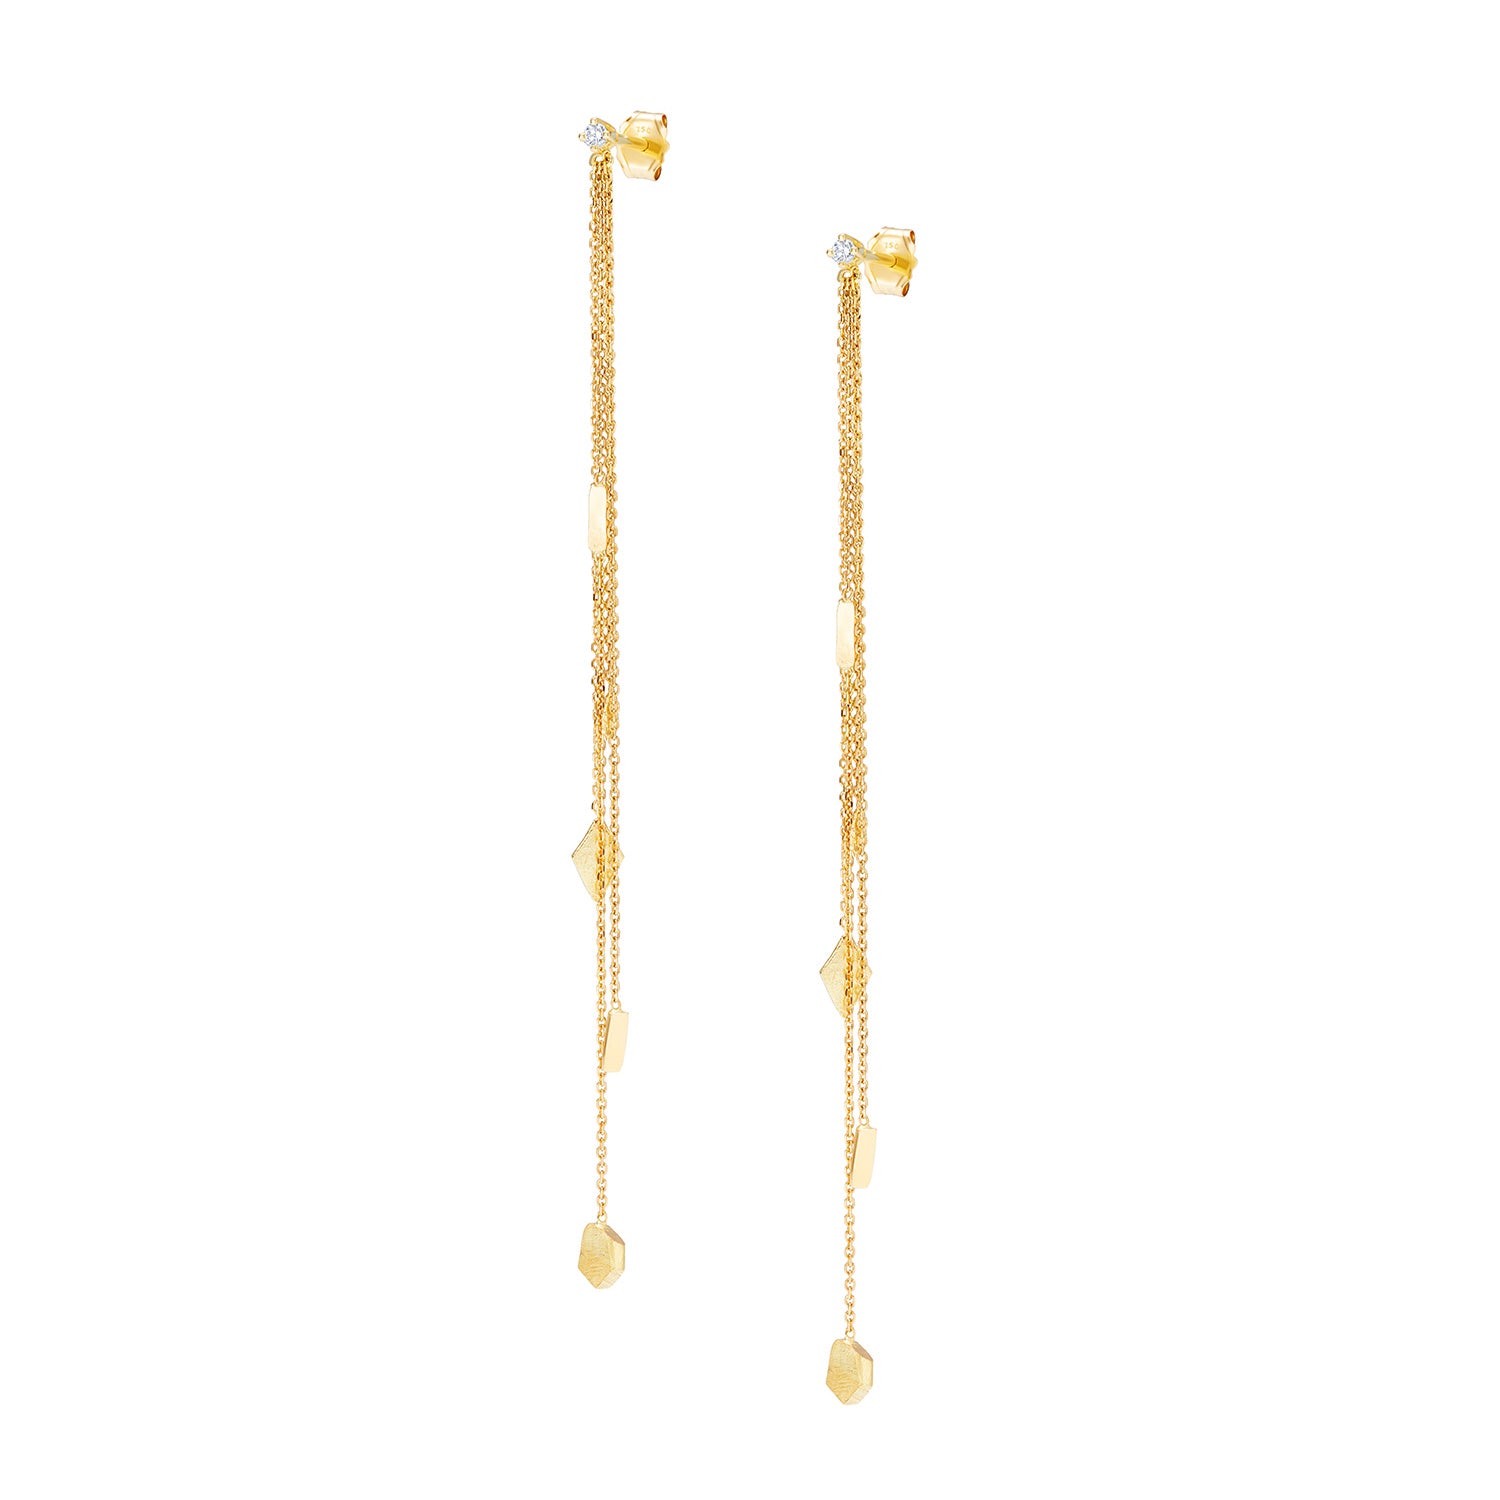 Gold Spiral Earrings, 14K Gold Filled – Hoops By Hand